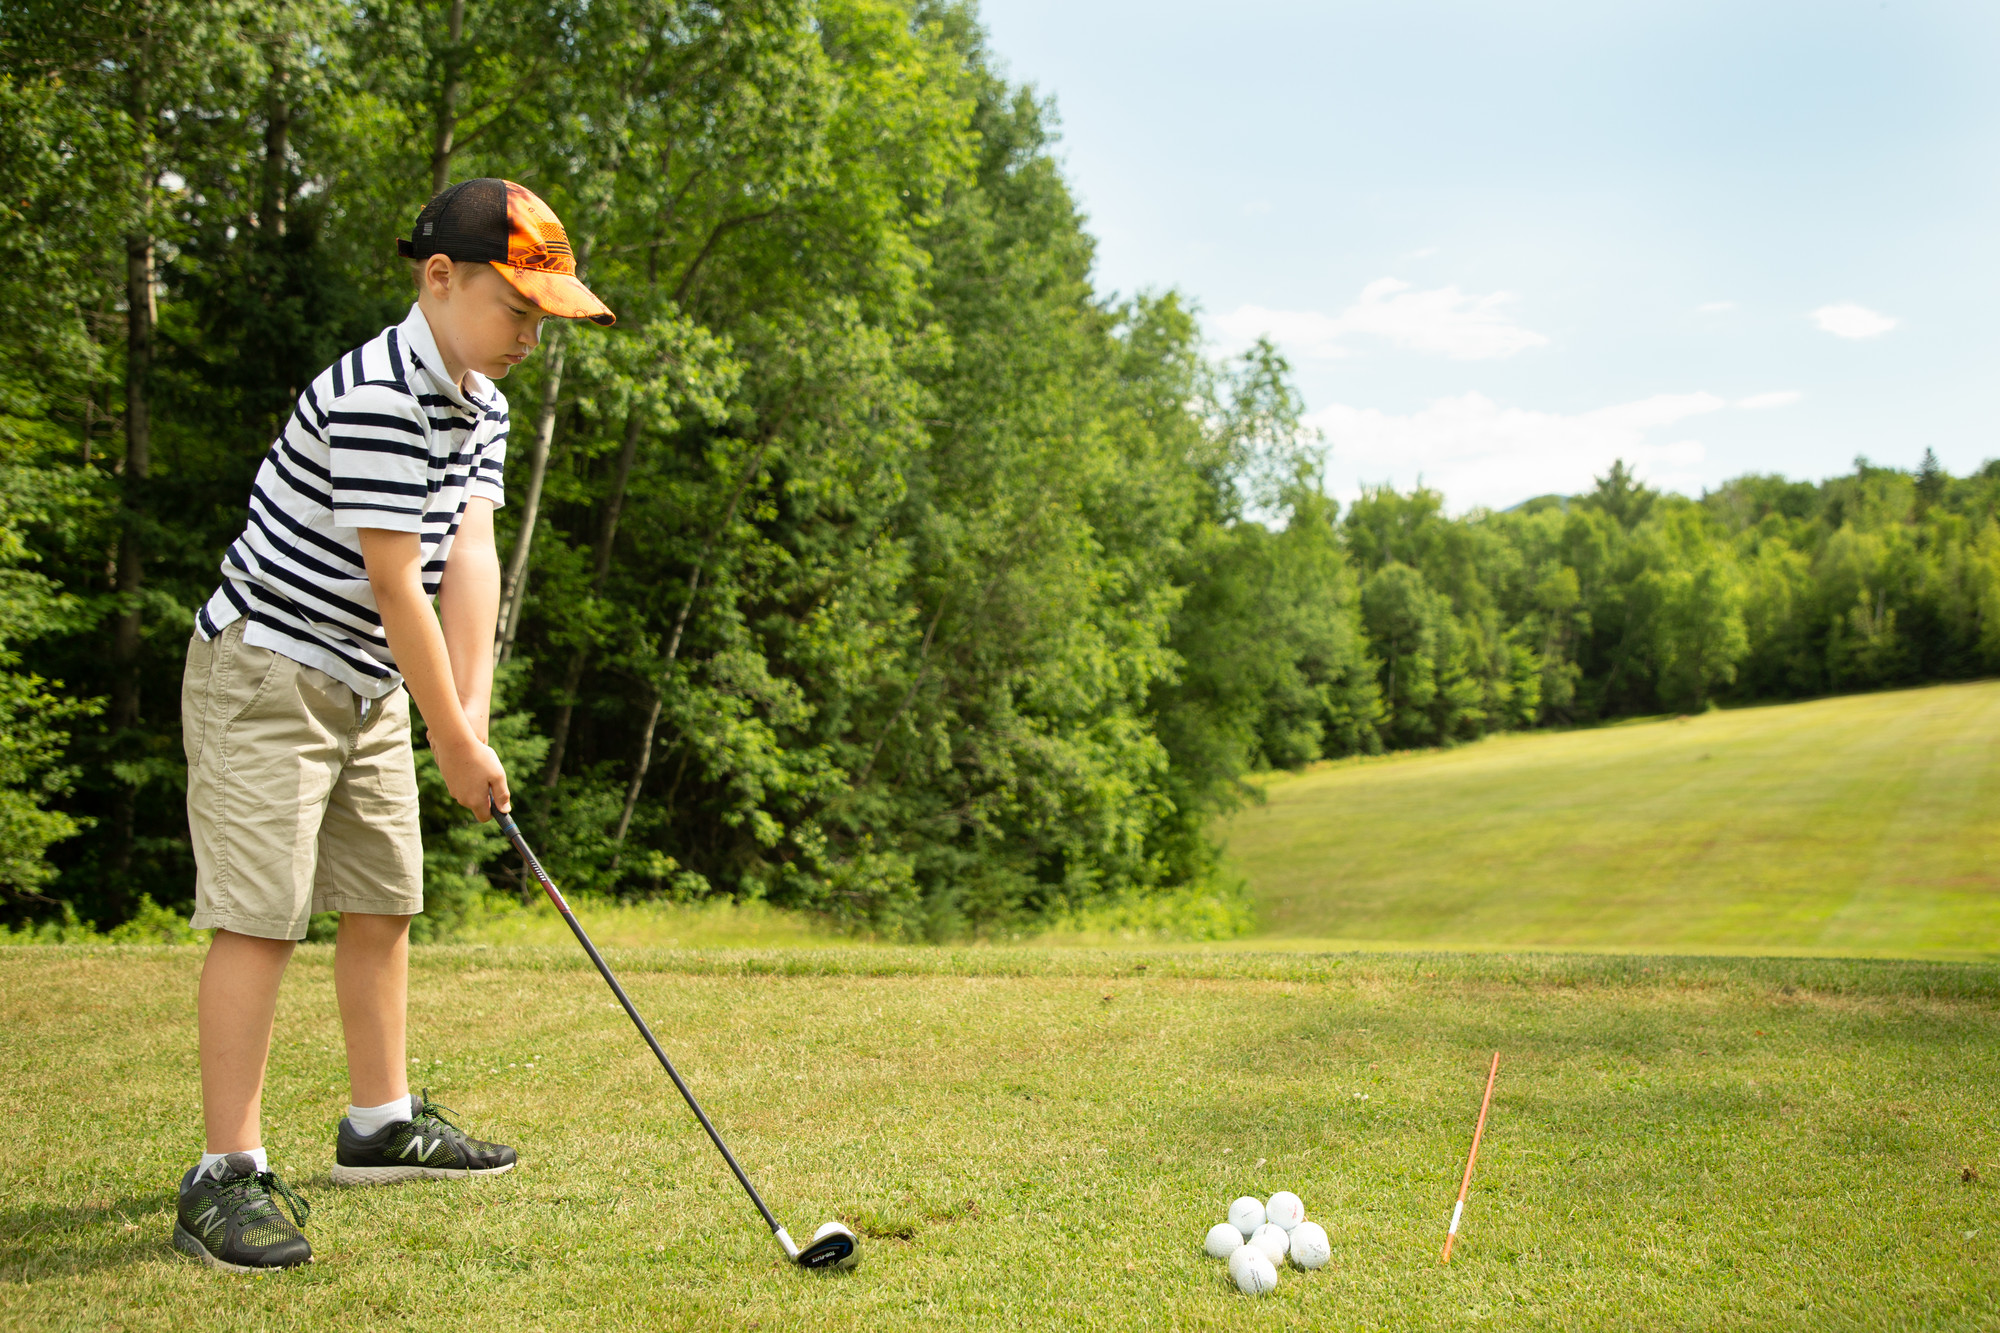 A young boy prepares to tee off on a golf green&#44; with bright green trees along the fairway.